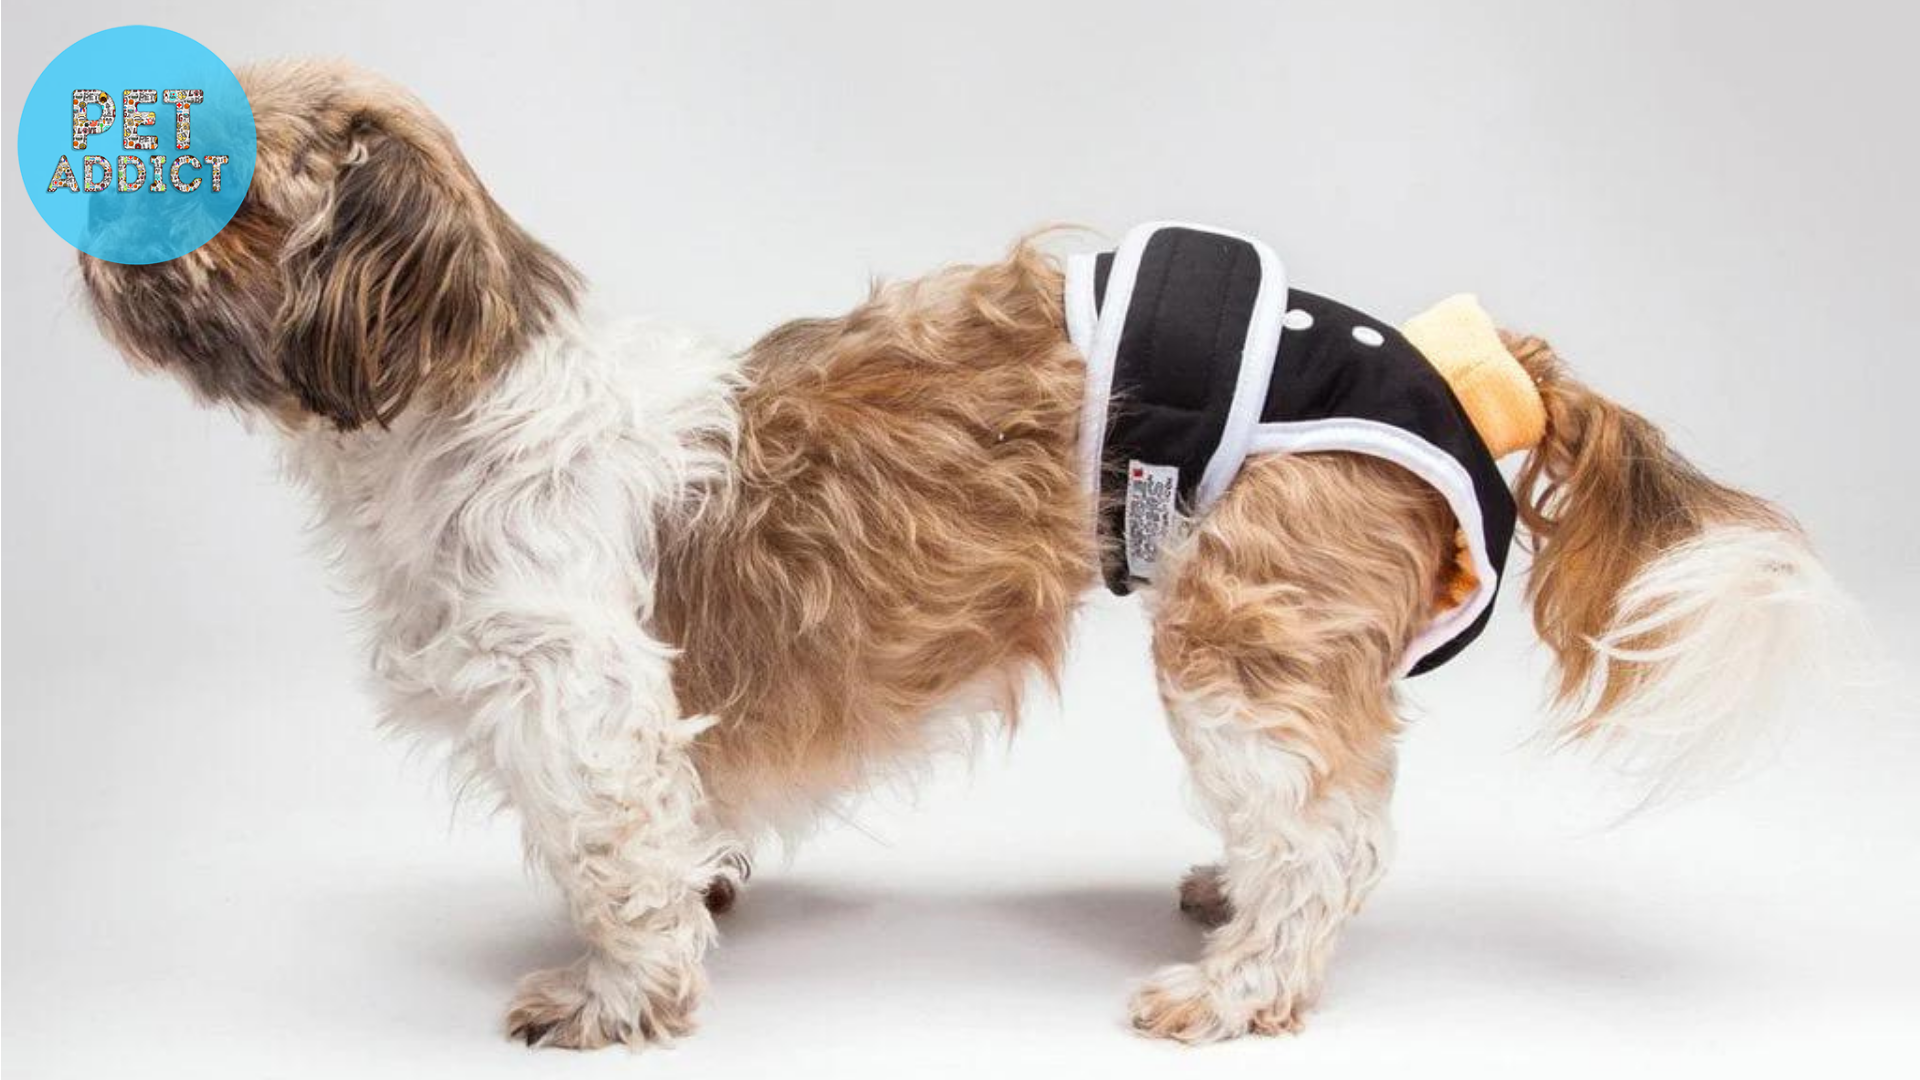 Washable and Reusable Dog Diapers for Males